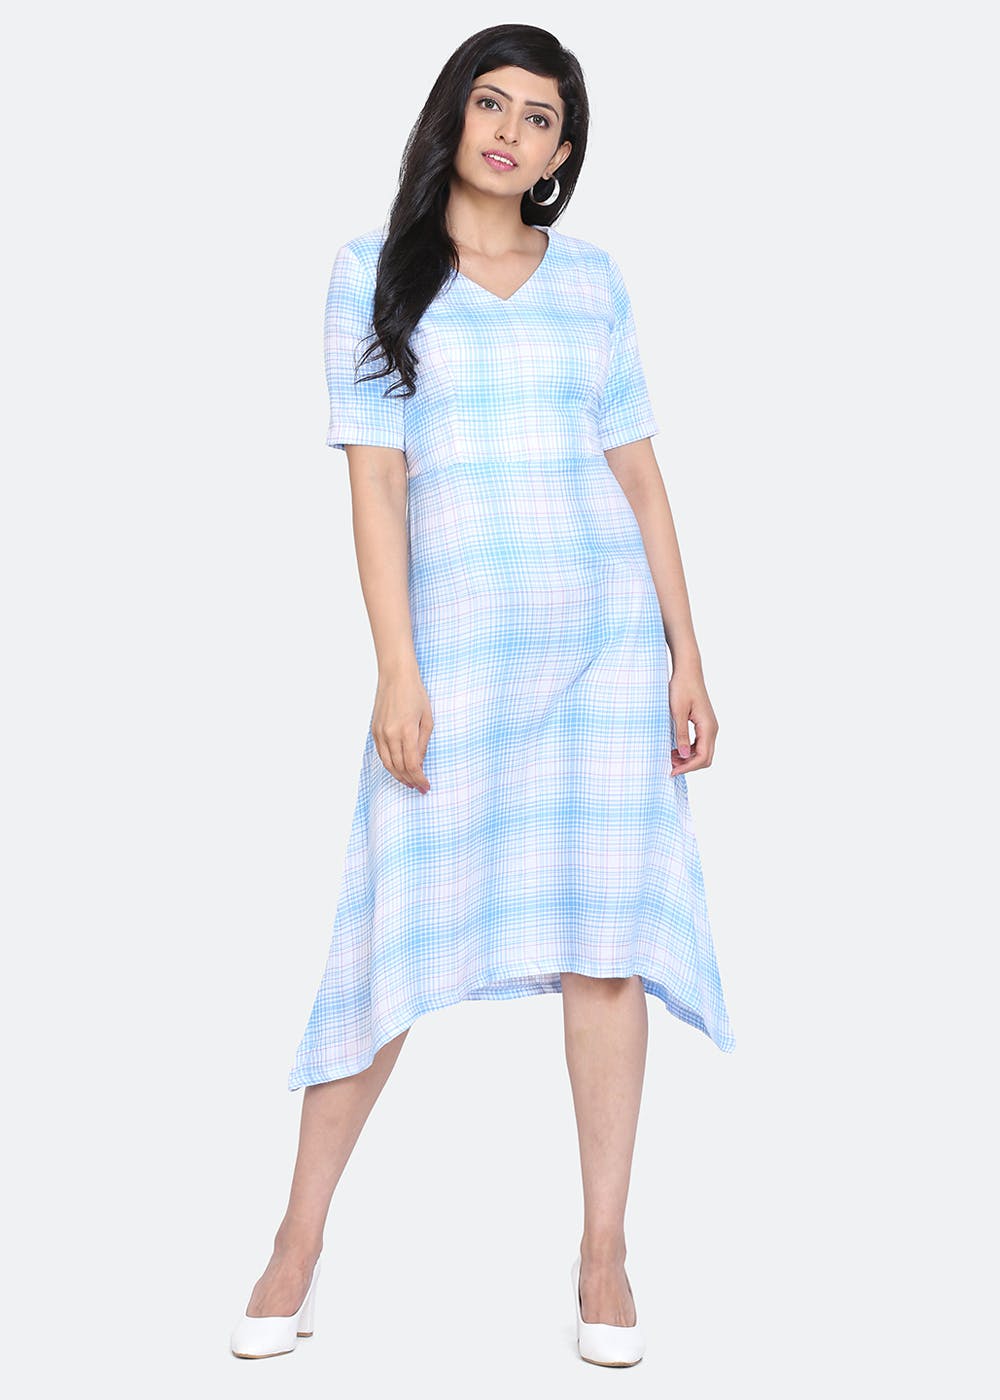 Plain Sky Blue Ladies Party Wear One Piece Dress at Rs 1150/piece in Surat  | ID: 25643317855